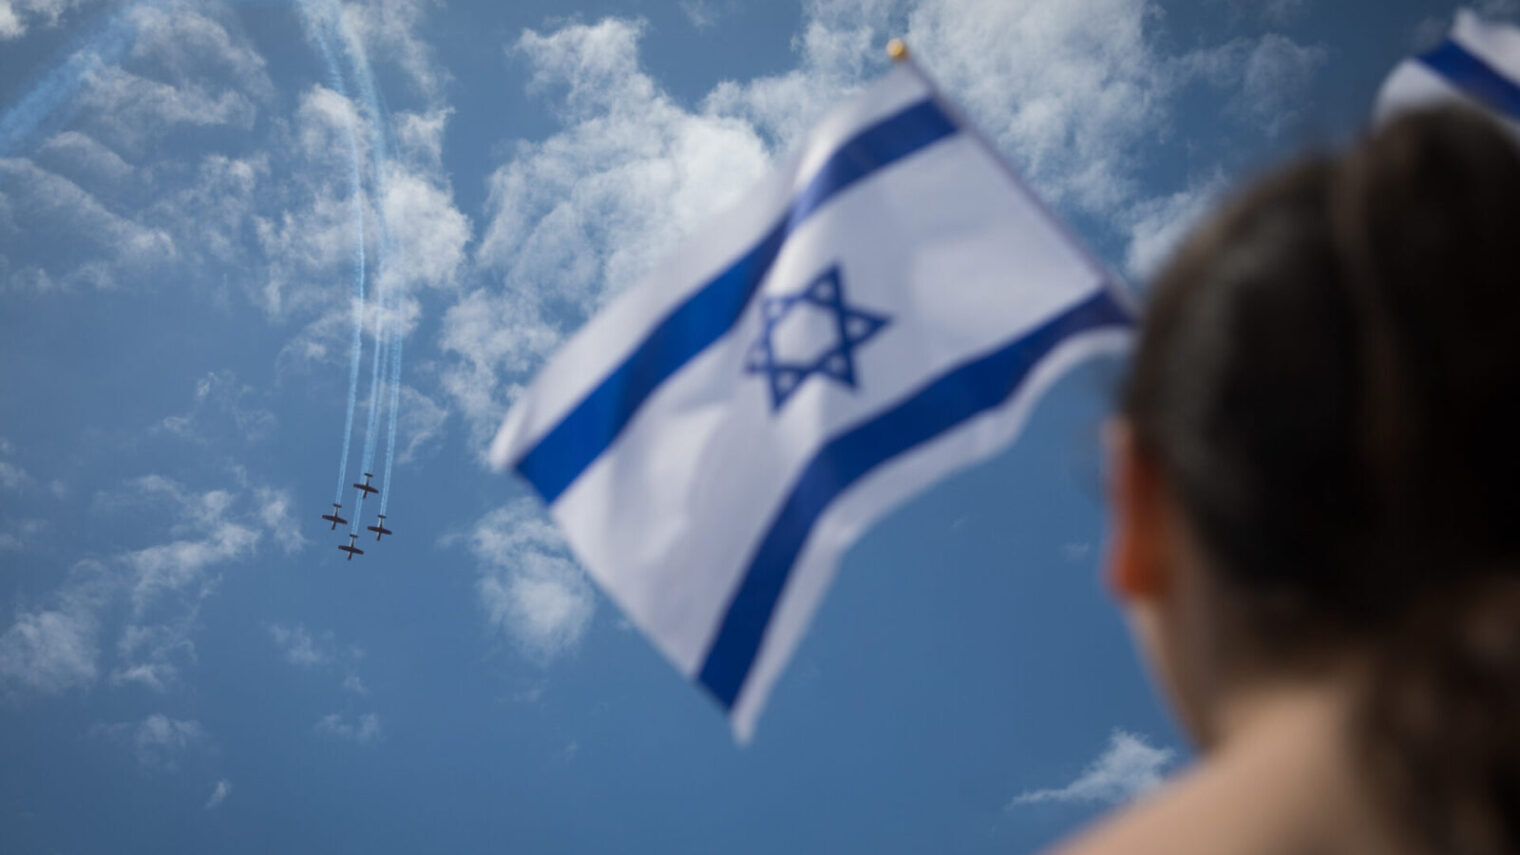 People enjoy the military airshow at Bograshov Beach in Tel Aviv on Israel's 71st Independence Day, May 9, 2019. Photo by Hadas Parush/Flash90